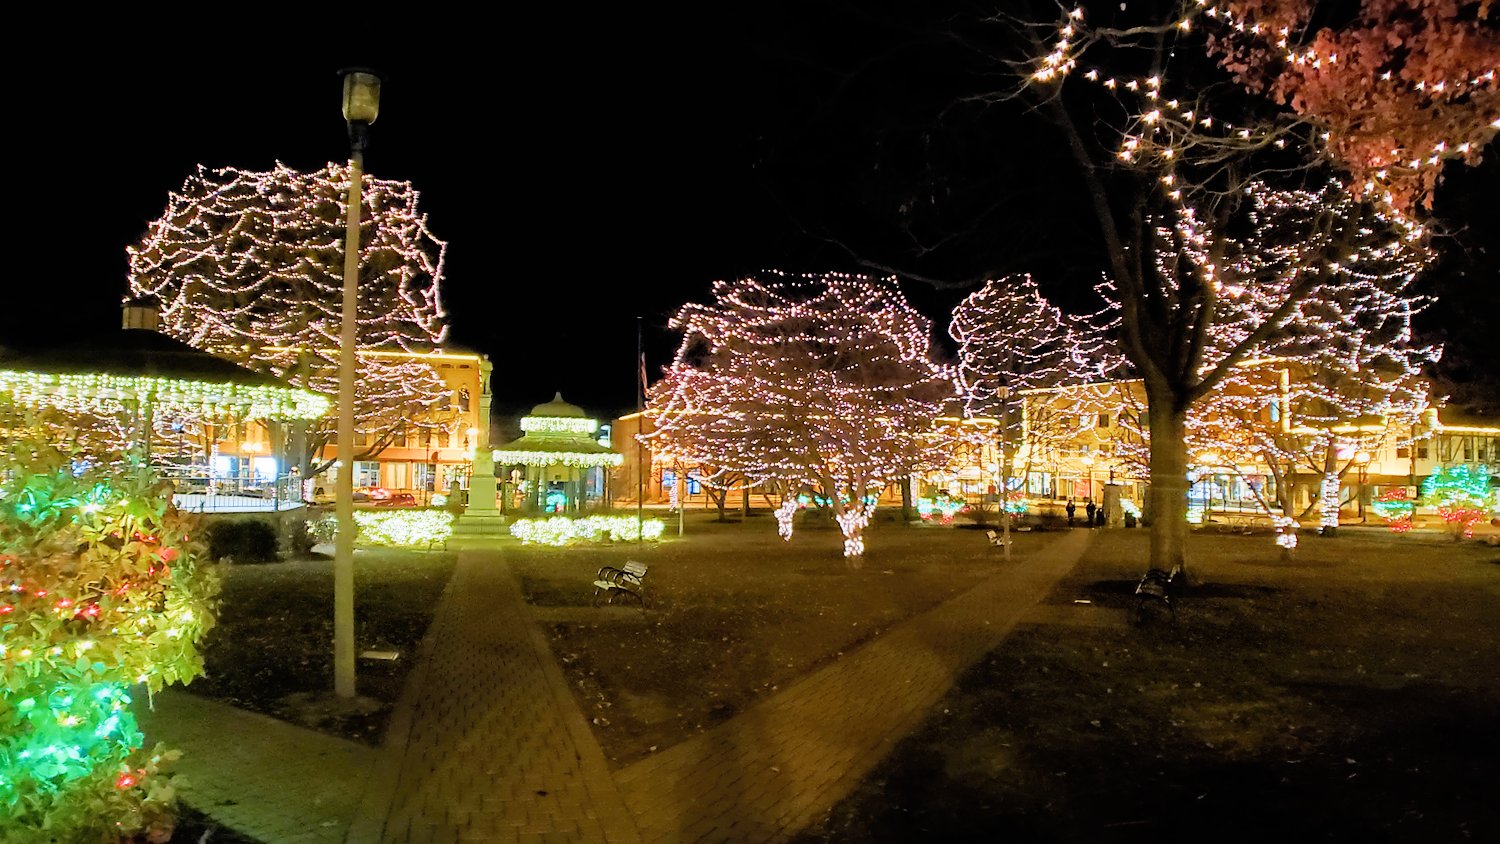 Trees lit up at the Historic Square in Woodstock, IL.